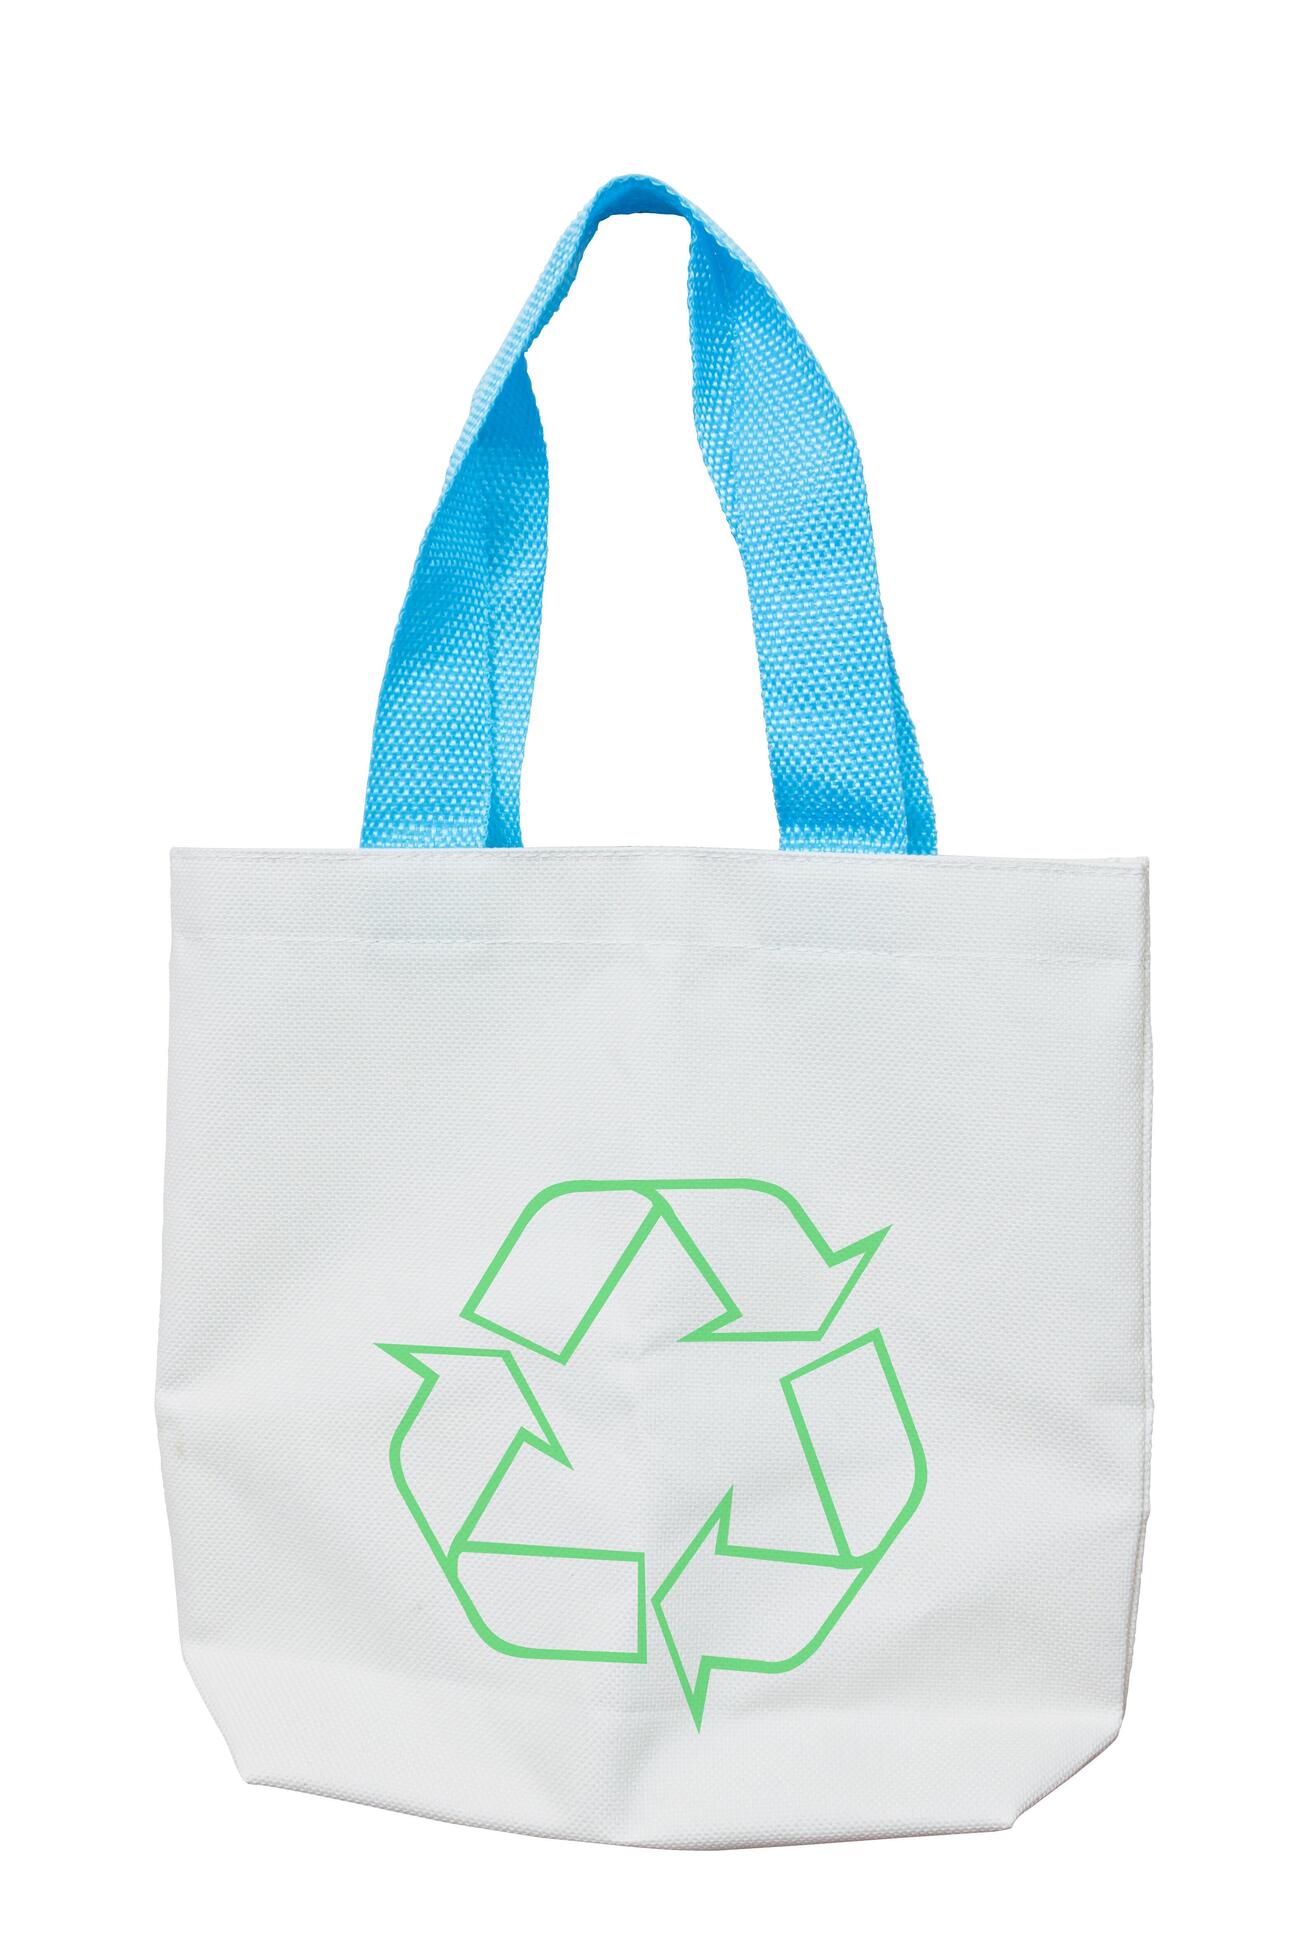 Say No To Plastic, Use Cloth Bags, World Environment Day, Cute Cartoon  Style Concept. Green Ecology Earth Vector Illustration. Royalty Free SVG,  Cliparts, Vectors, and Stock Illustration. Image 125873099.